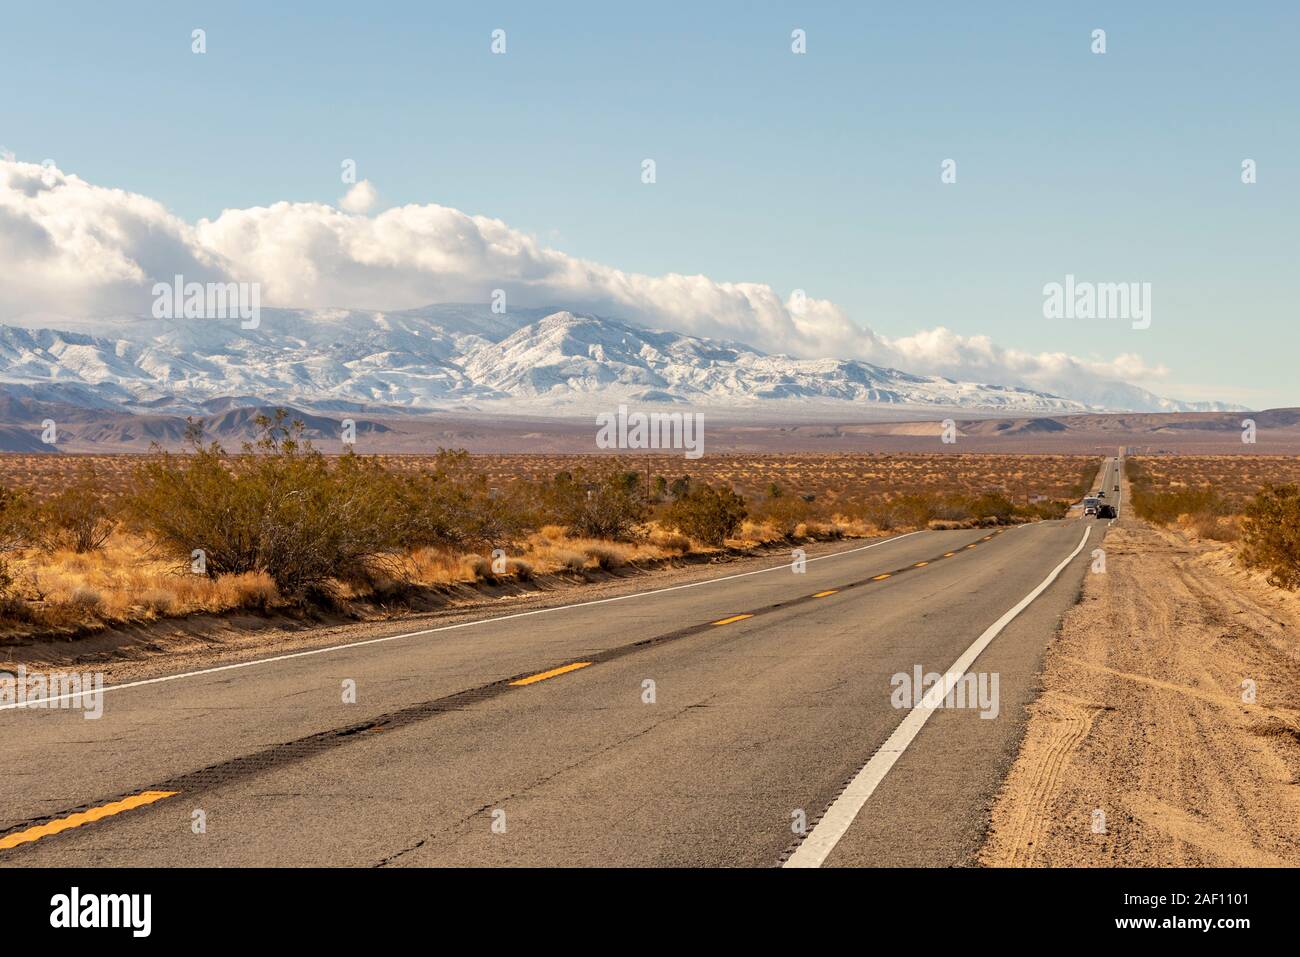 A highway and snowy mountains in late autumn in the Mojave Desert and San Bernardino Mountains, Southern California, USA. Stock Photo